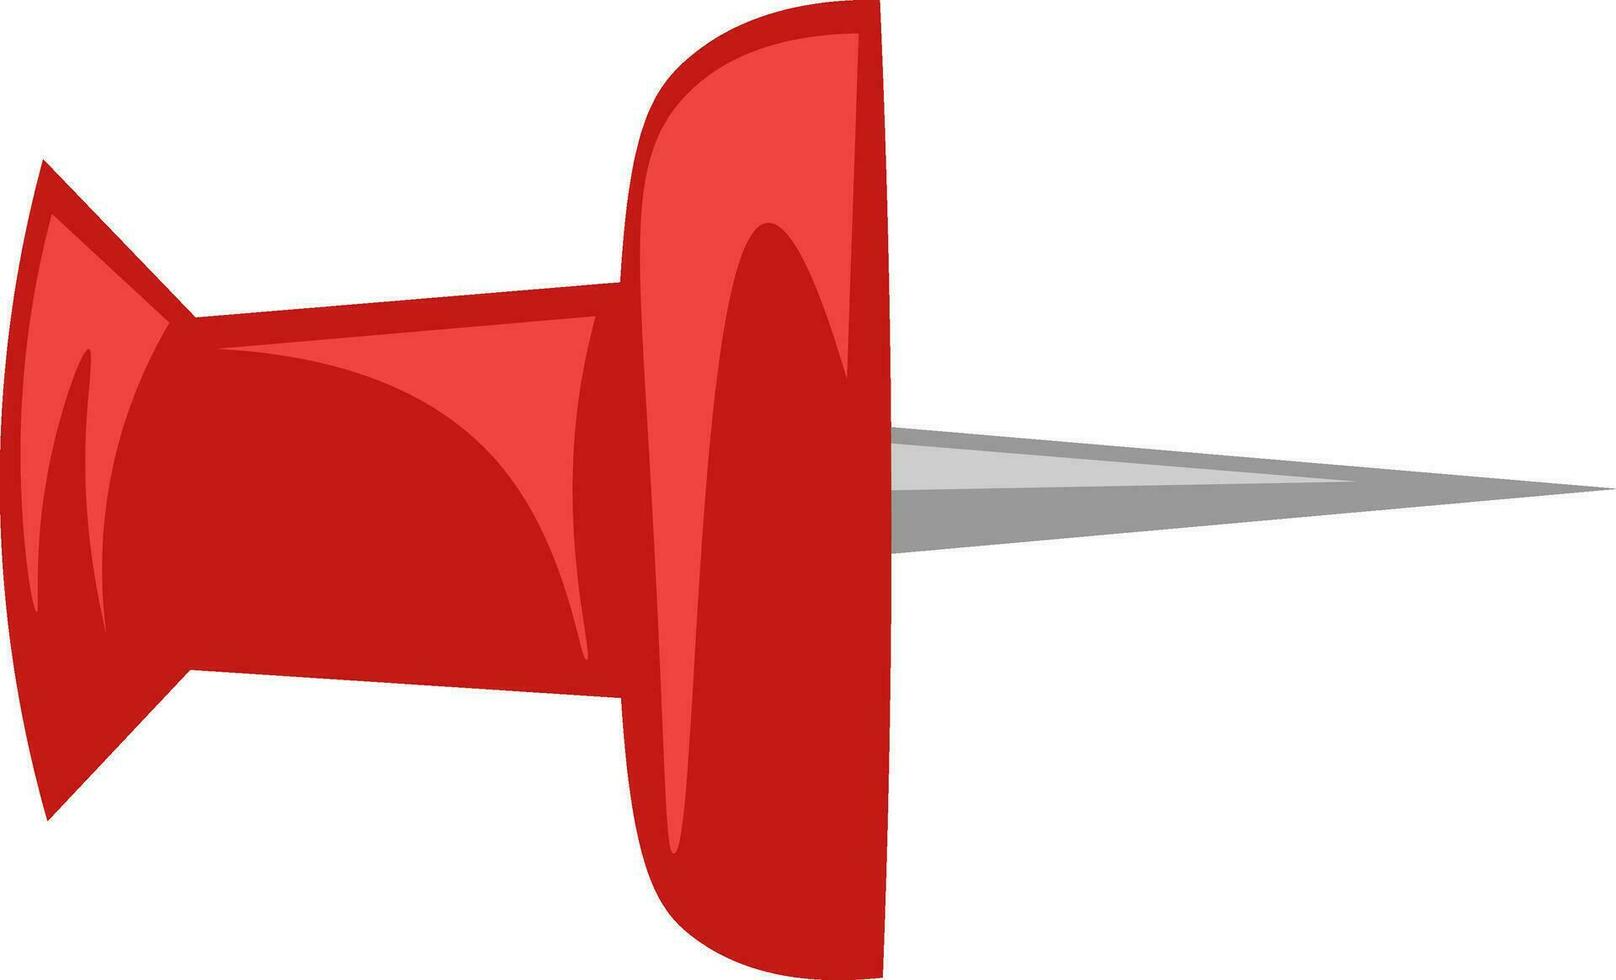 A red pin with a pointed end for creating holes onto papers or documents on a display board vector color drawing or illustration